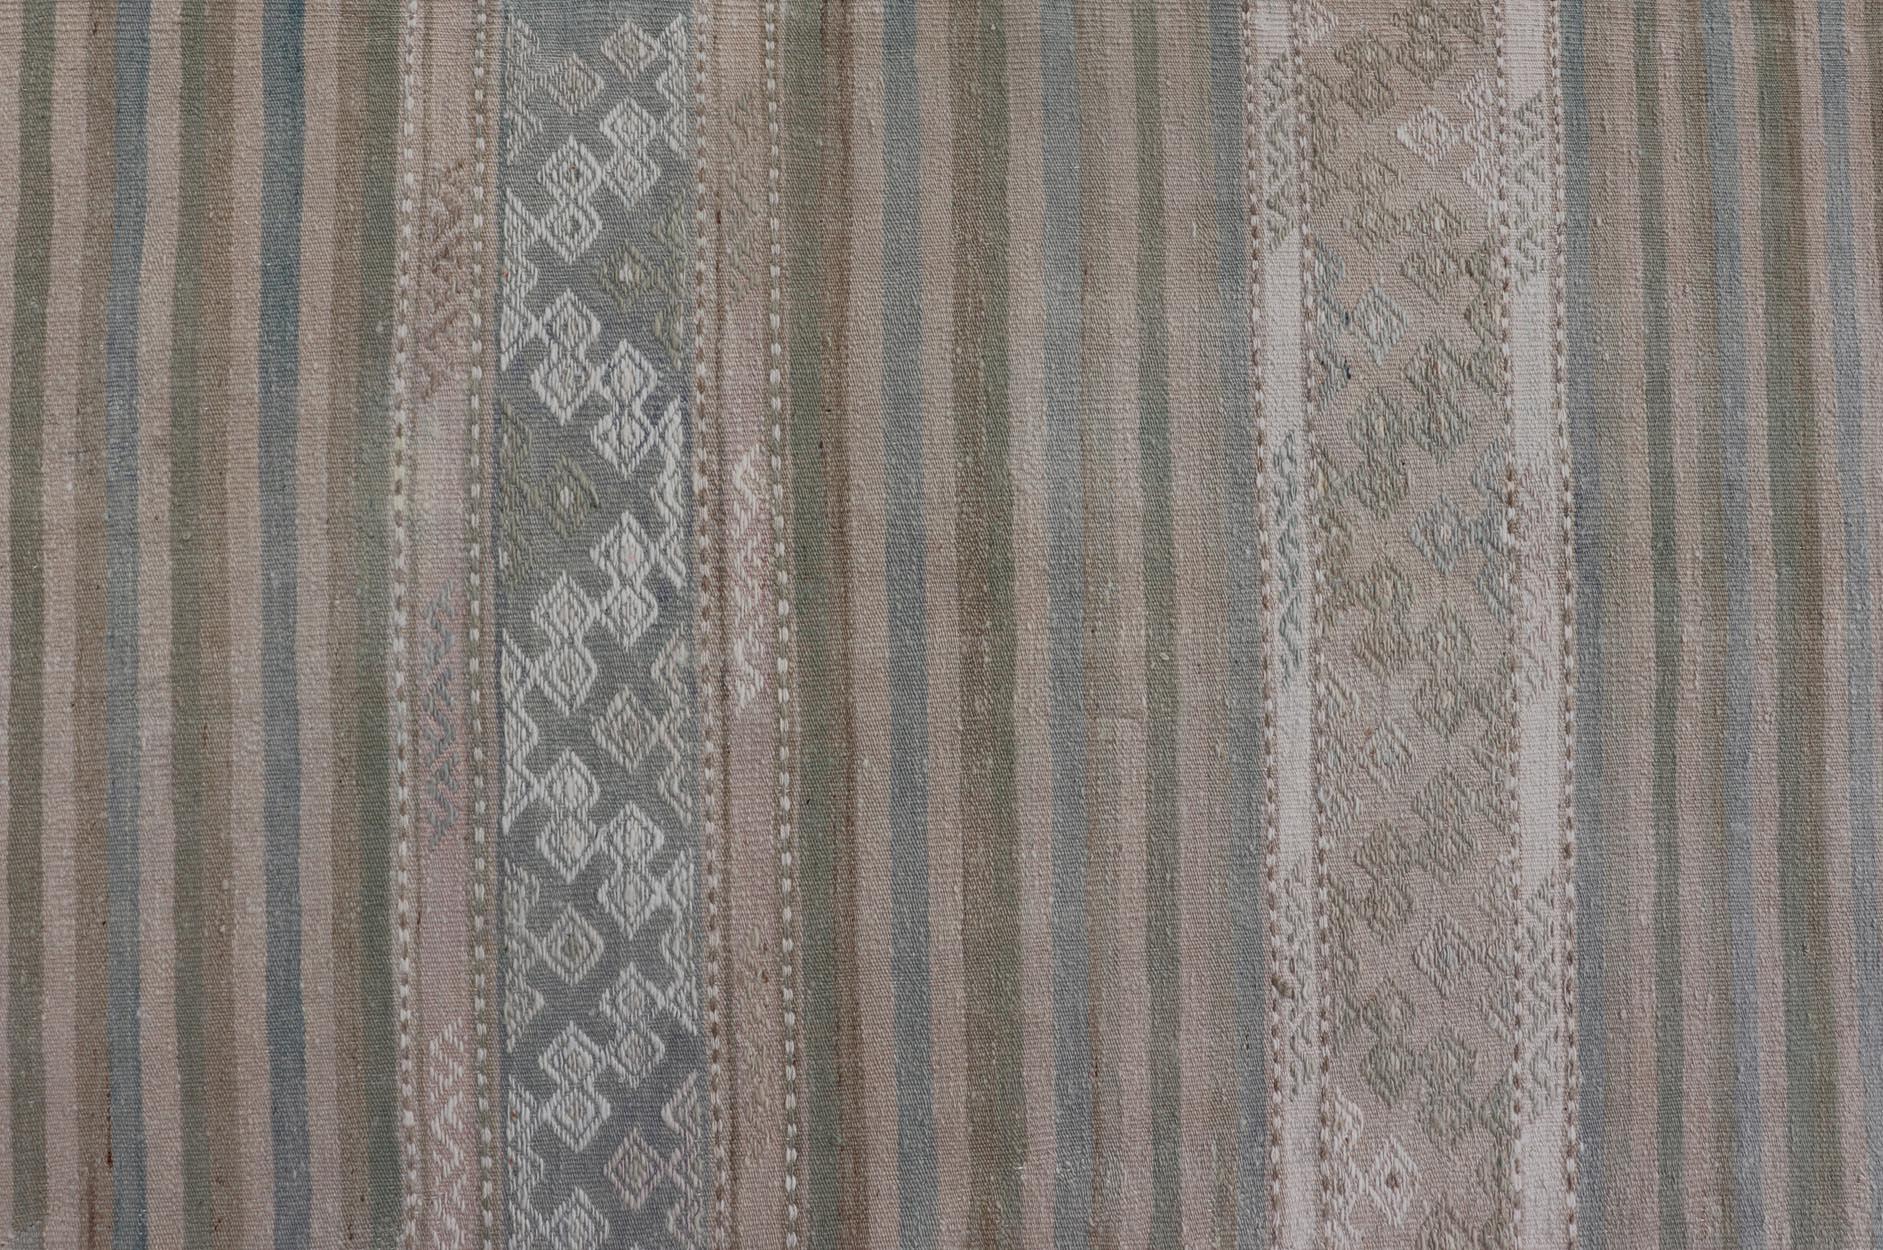 Turkish Gallery Flat-Weave Kilim in Muted Colors with Stripes and Embroideries For Sale 1